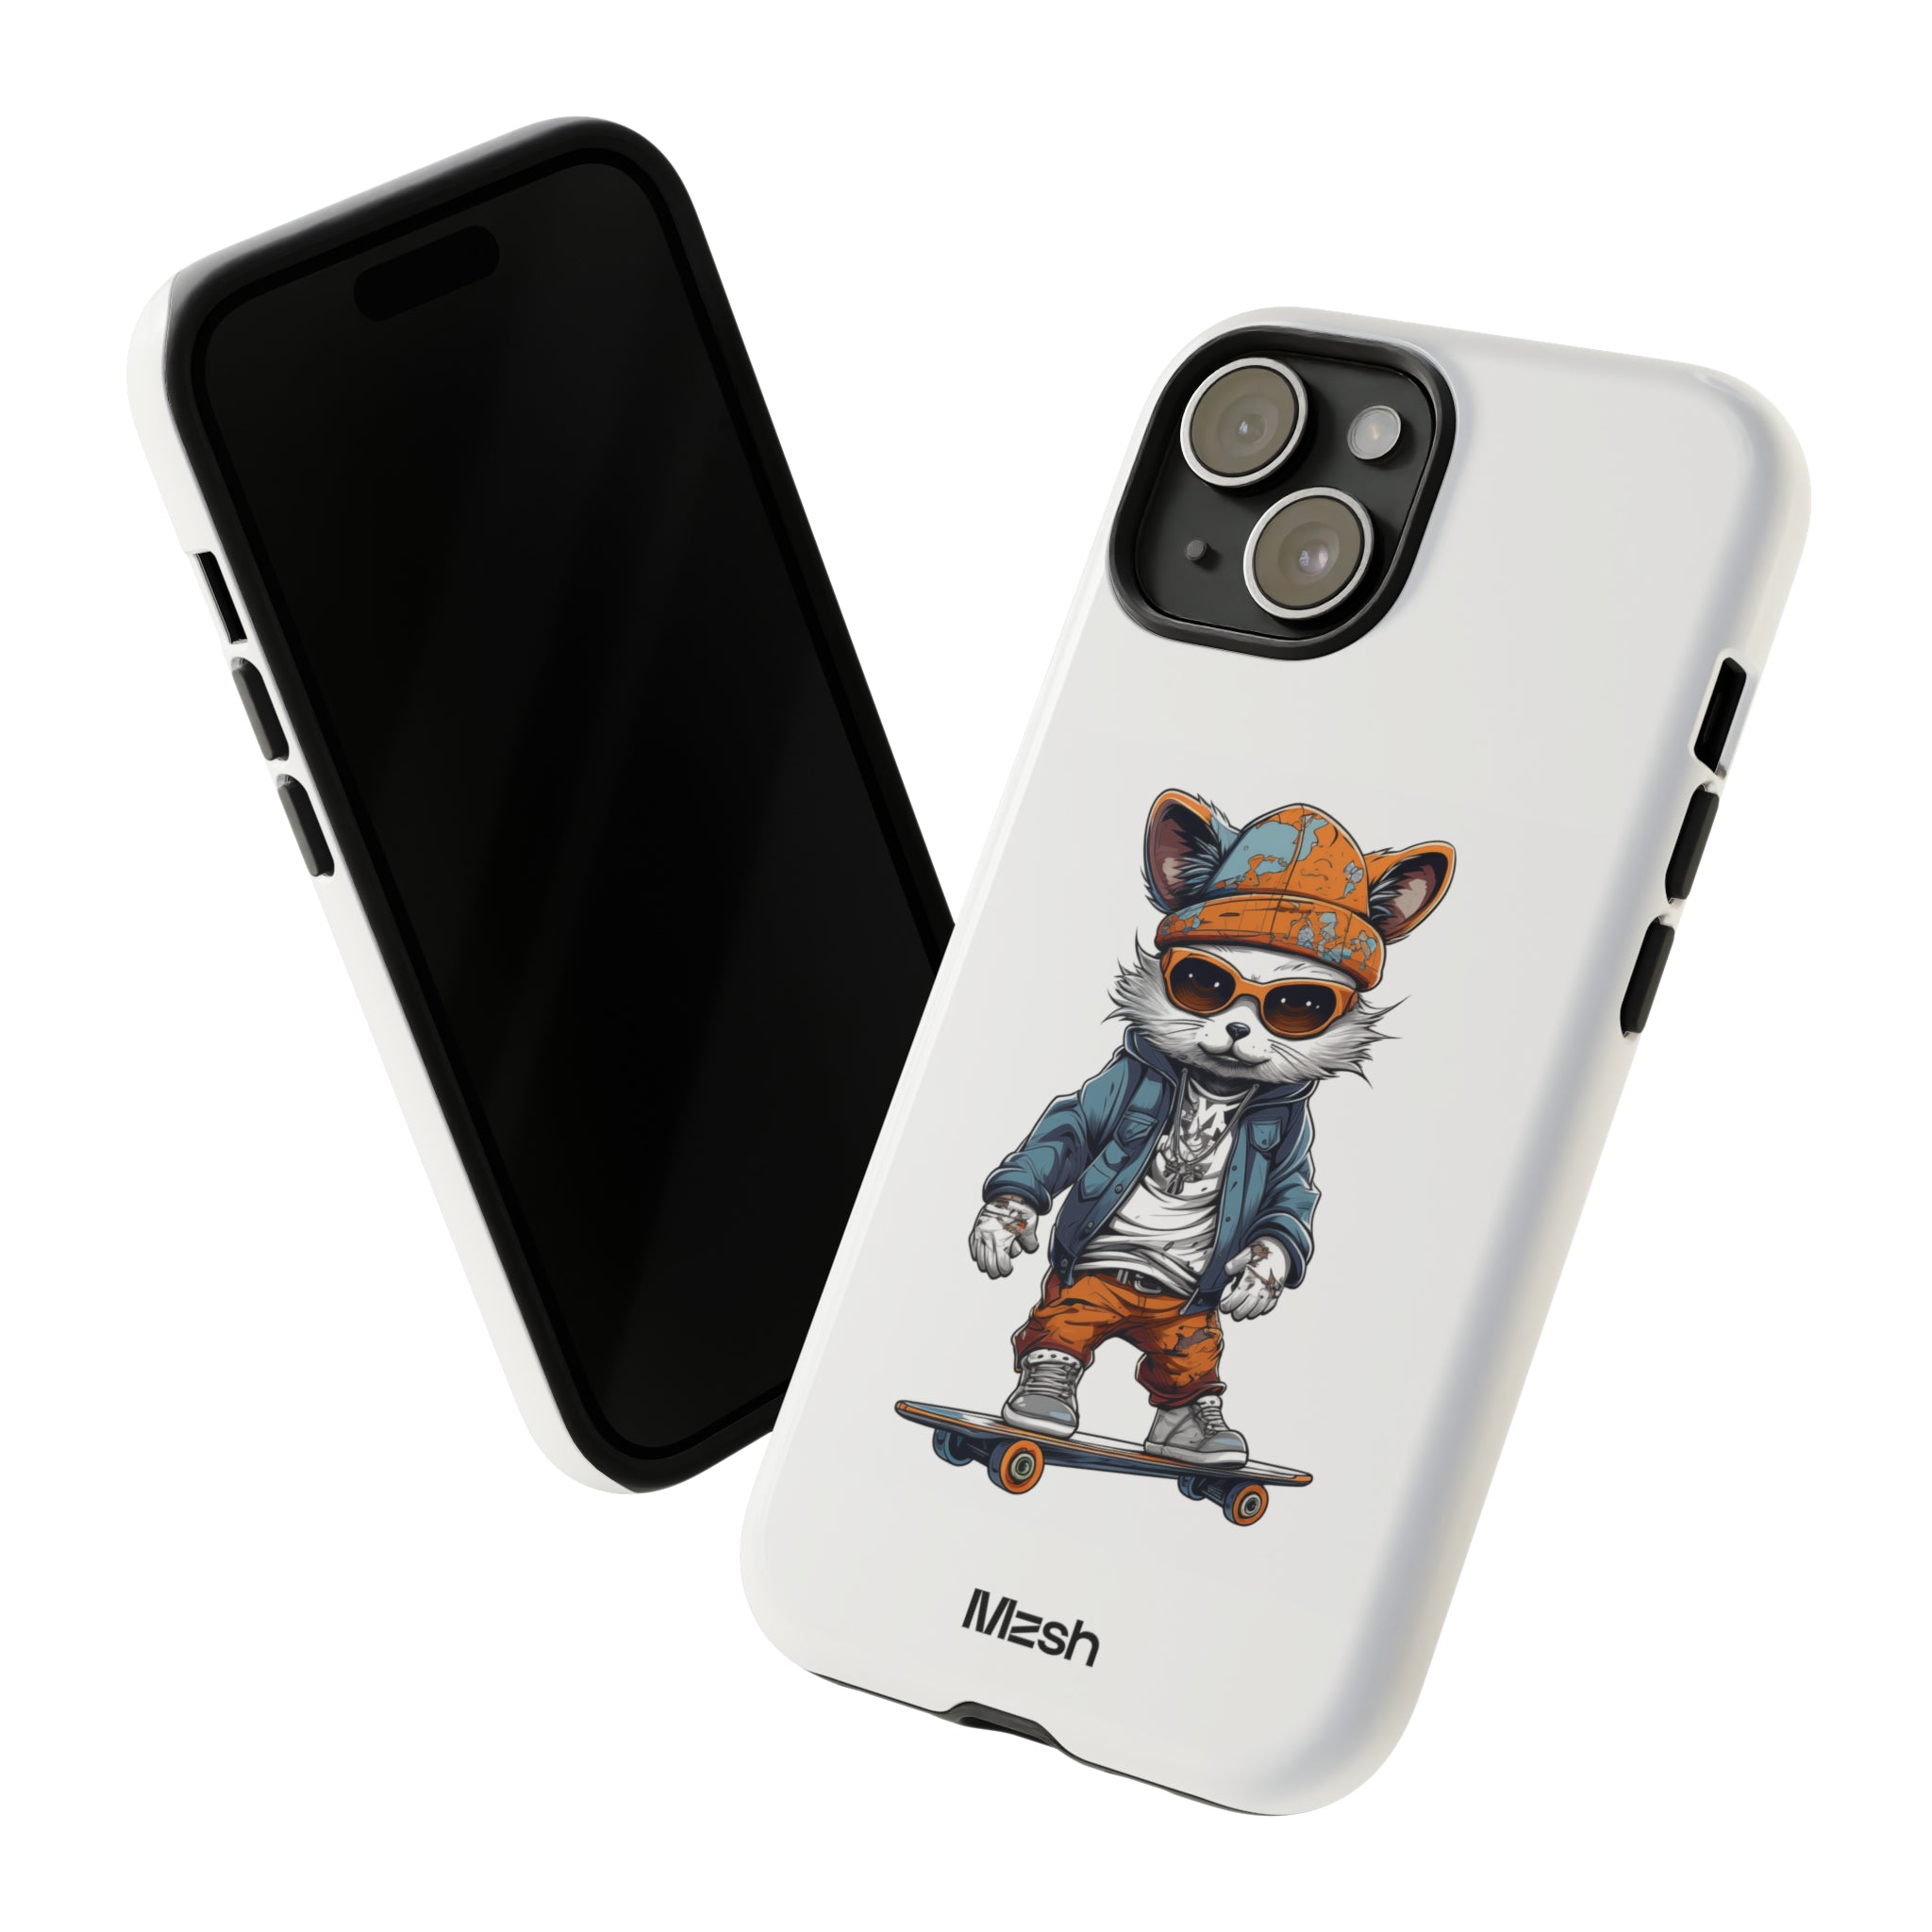 Purrfect Grind - iPhone Case